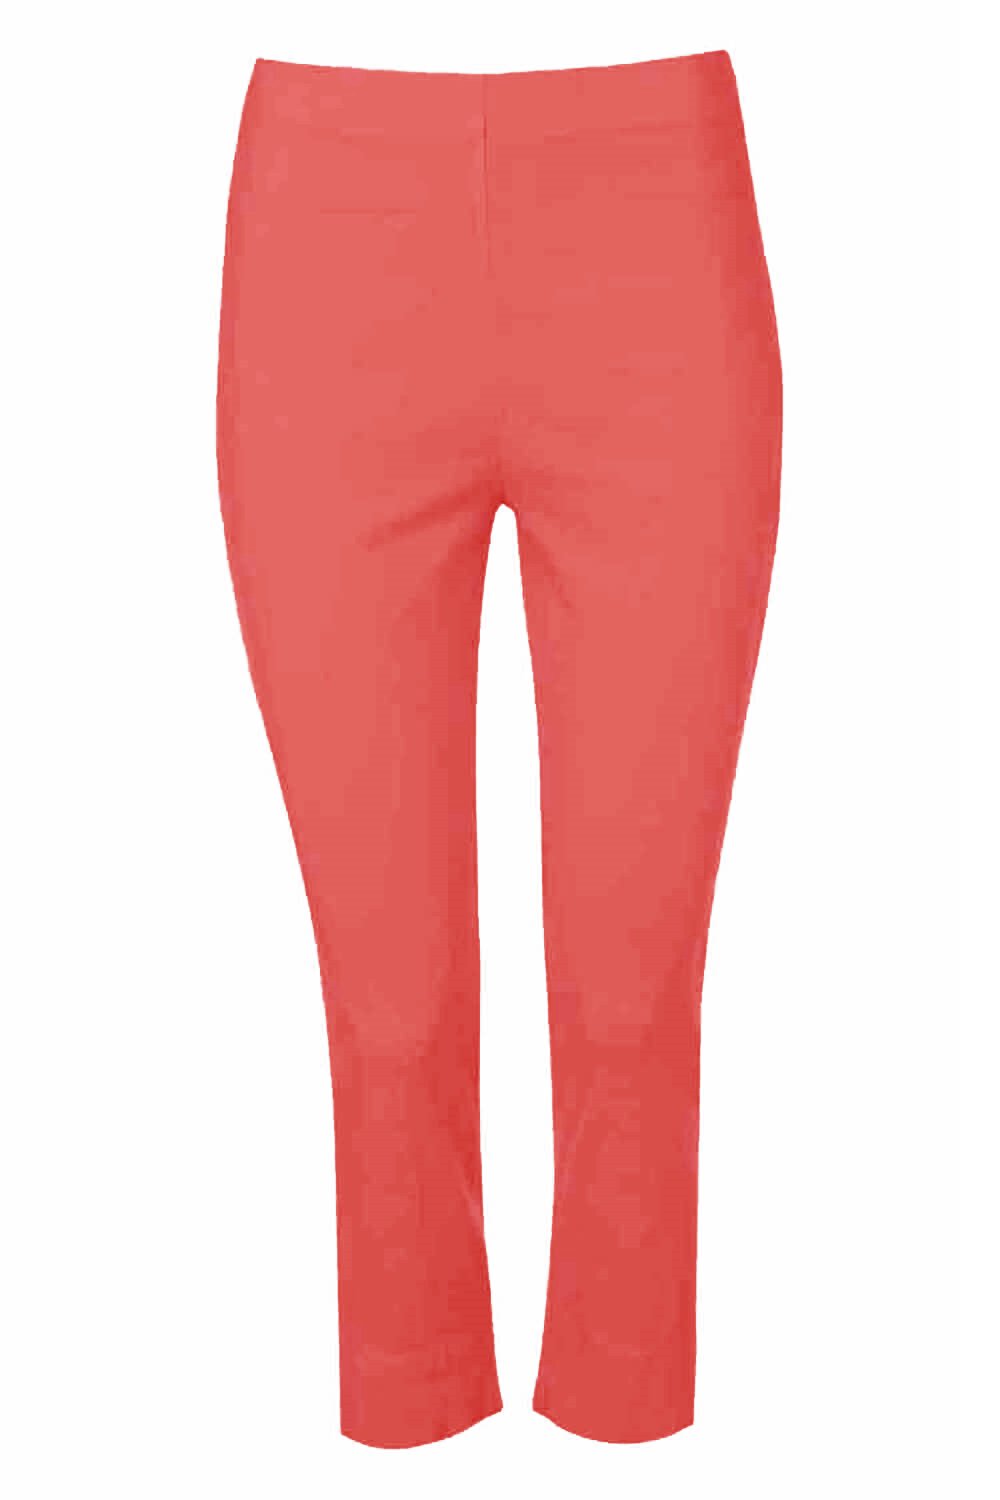 CORAL Cropped Stretch Trouser, Image 5 of 5